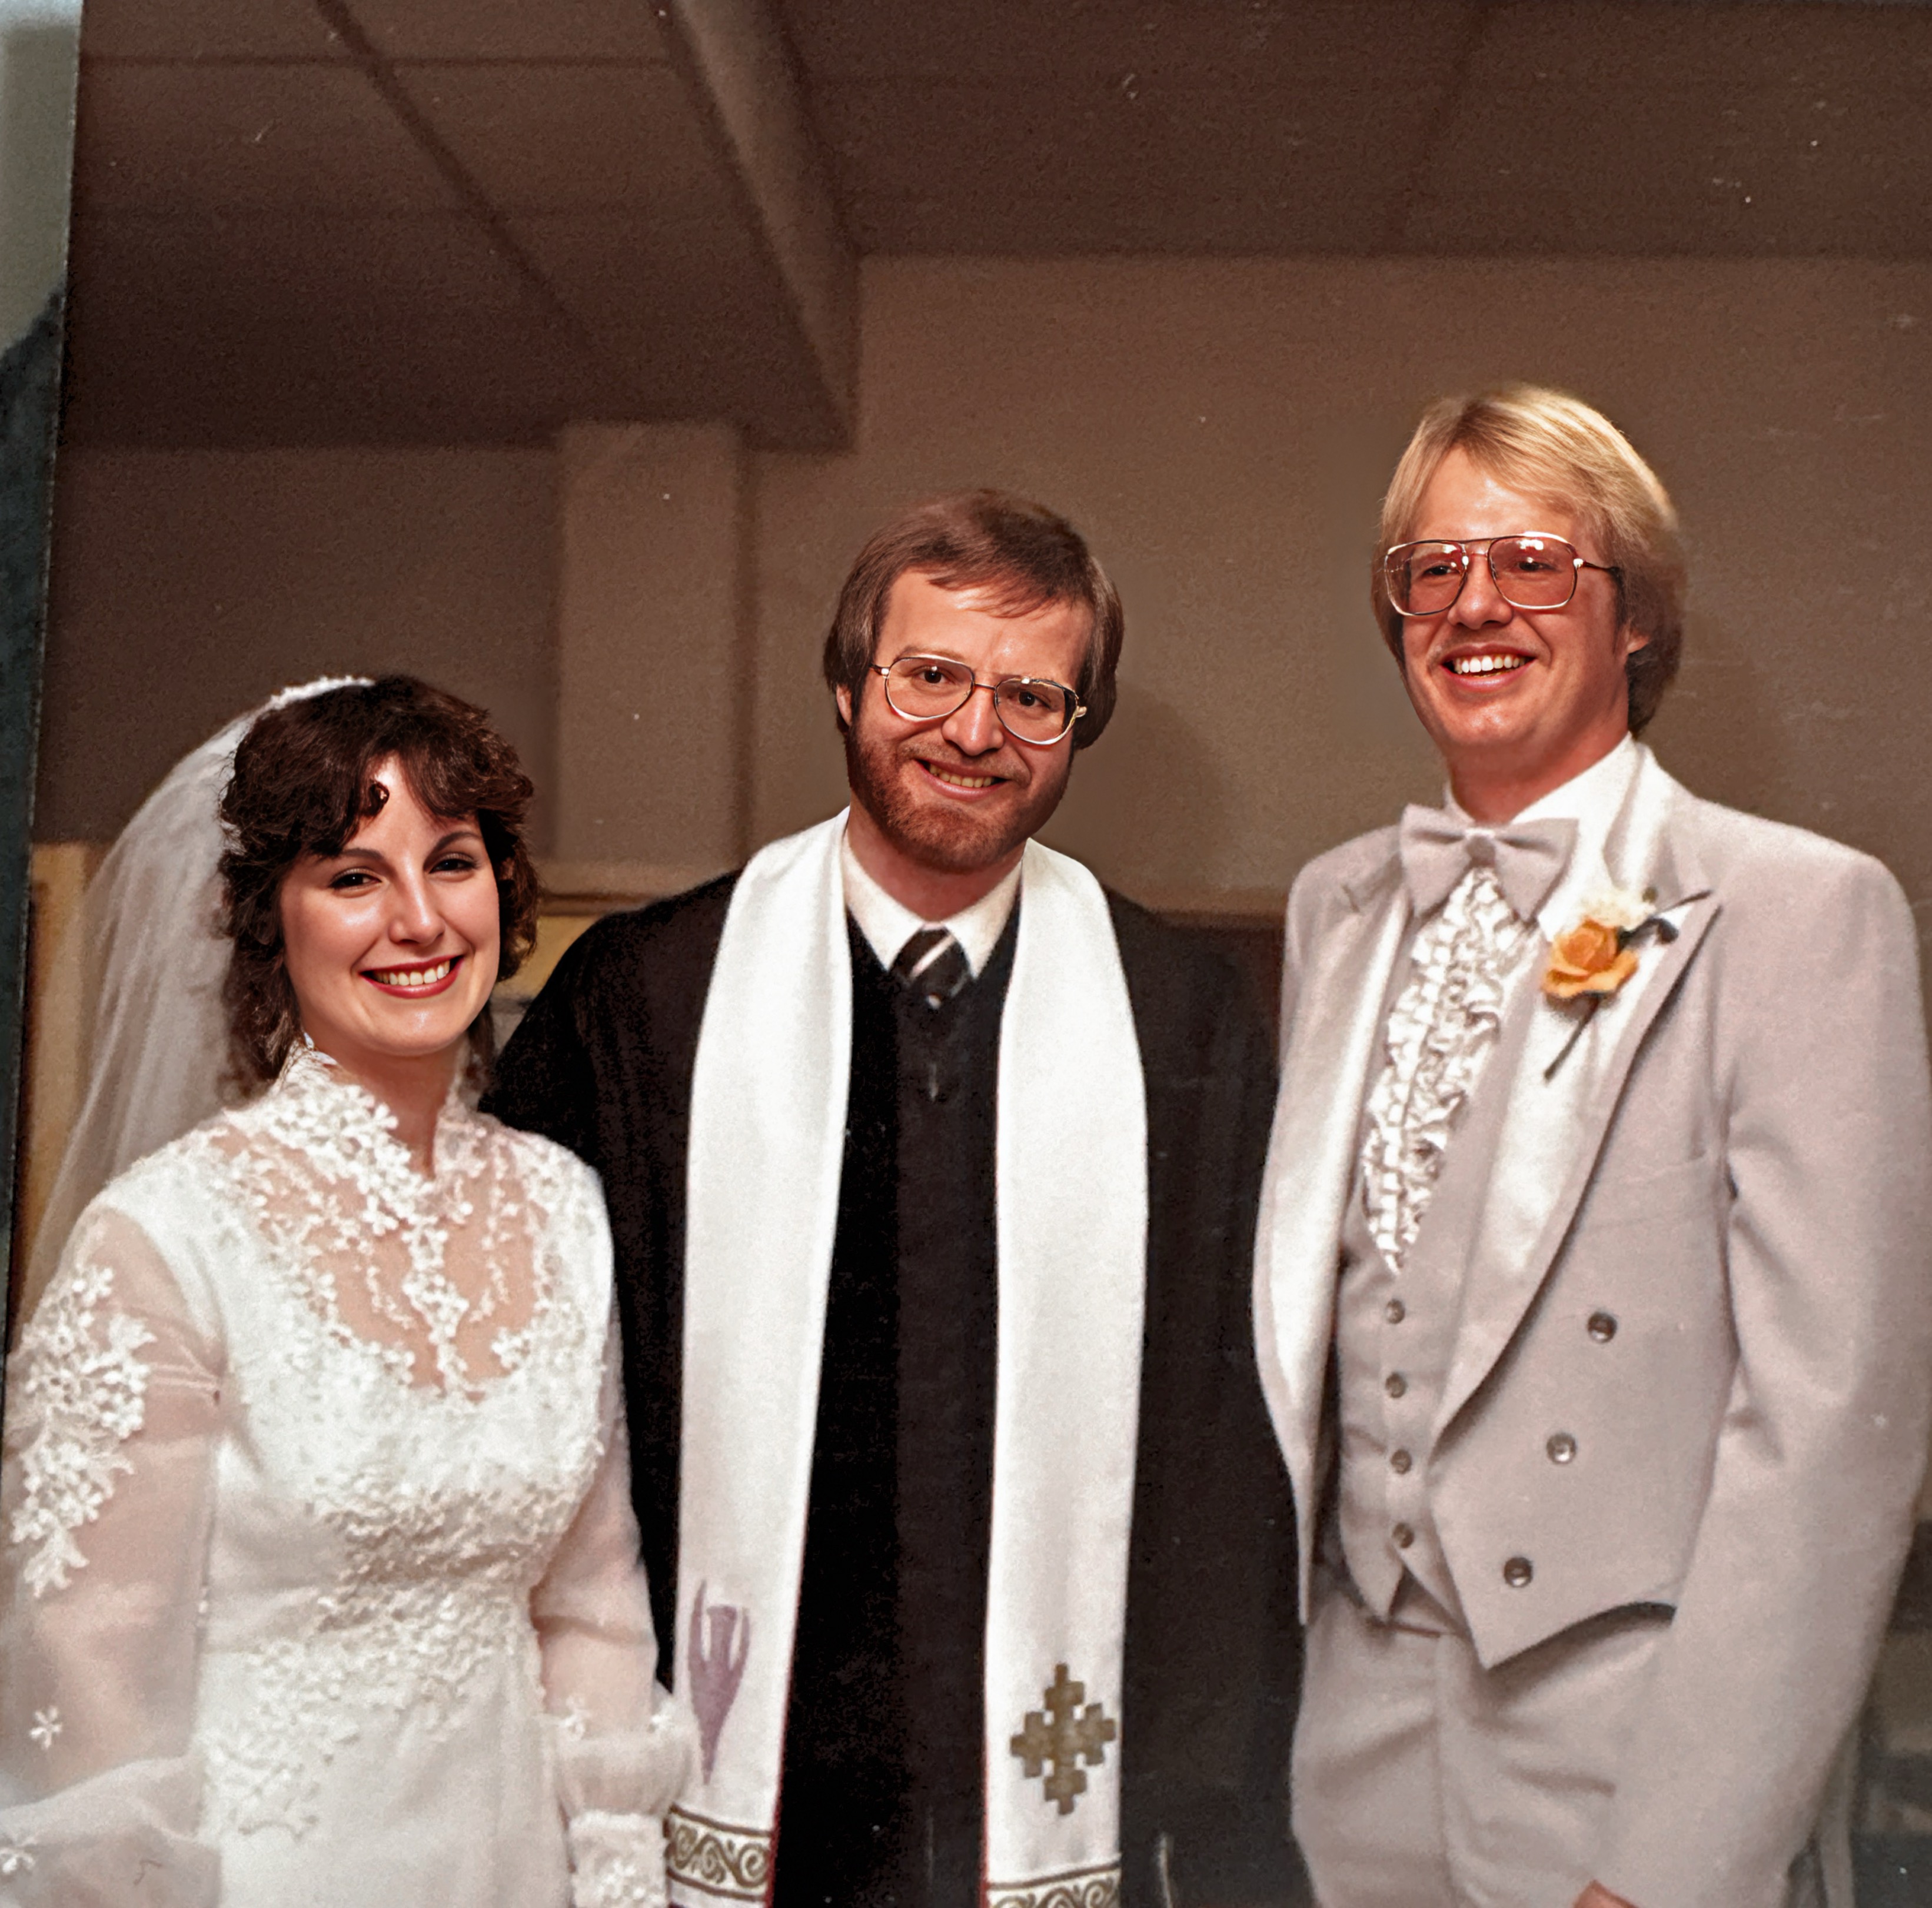 Don Waite marrying Darrell and I. 1981